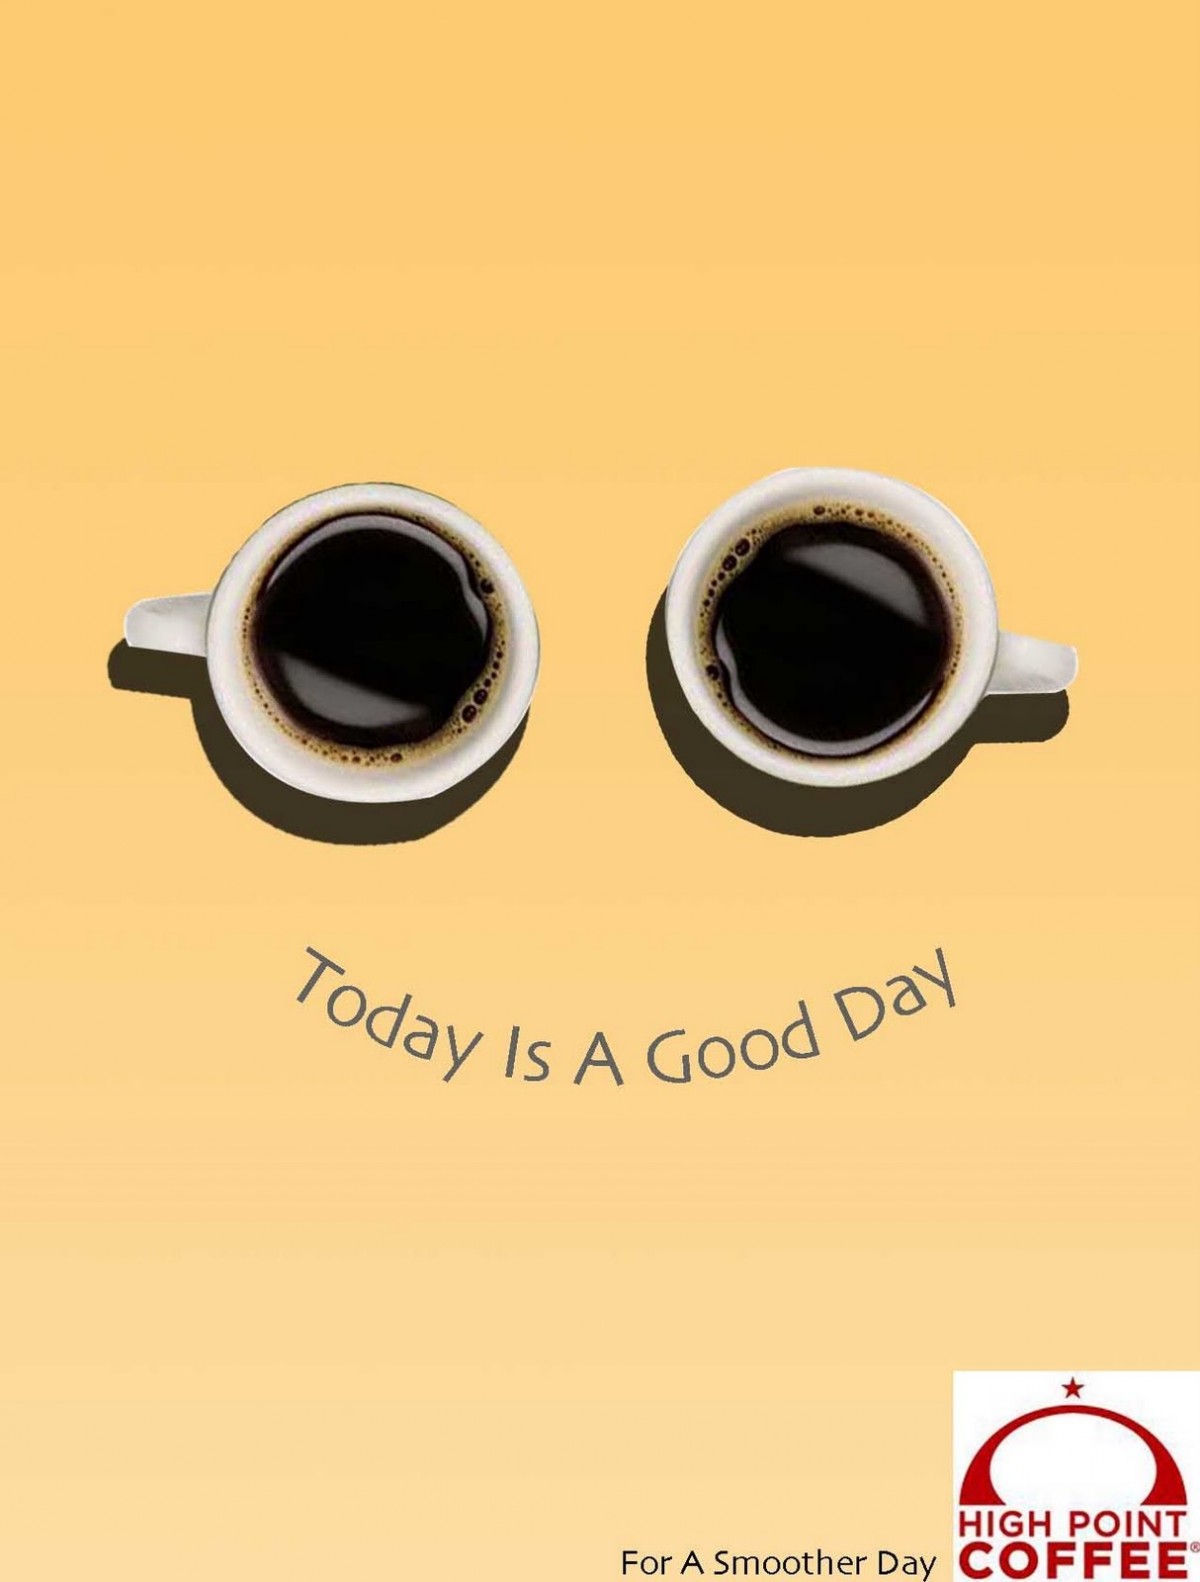 &quot;Today is a good day&quot; | High Point Coffee